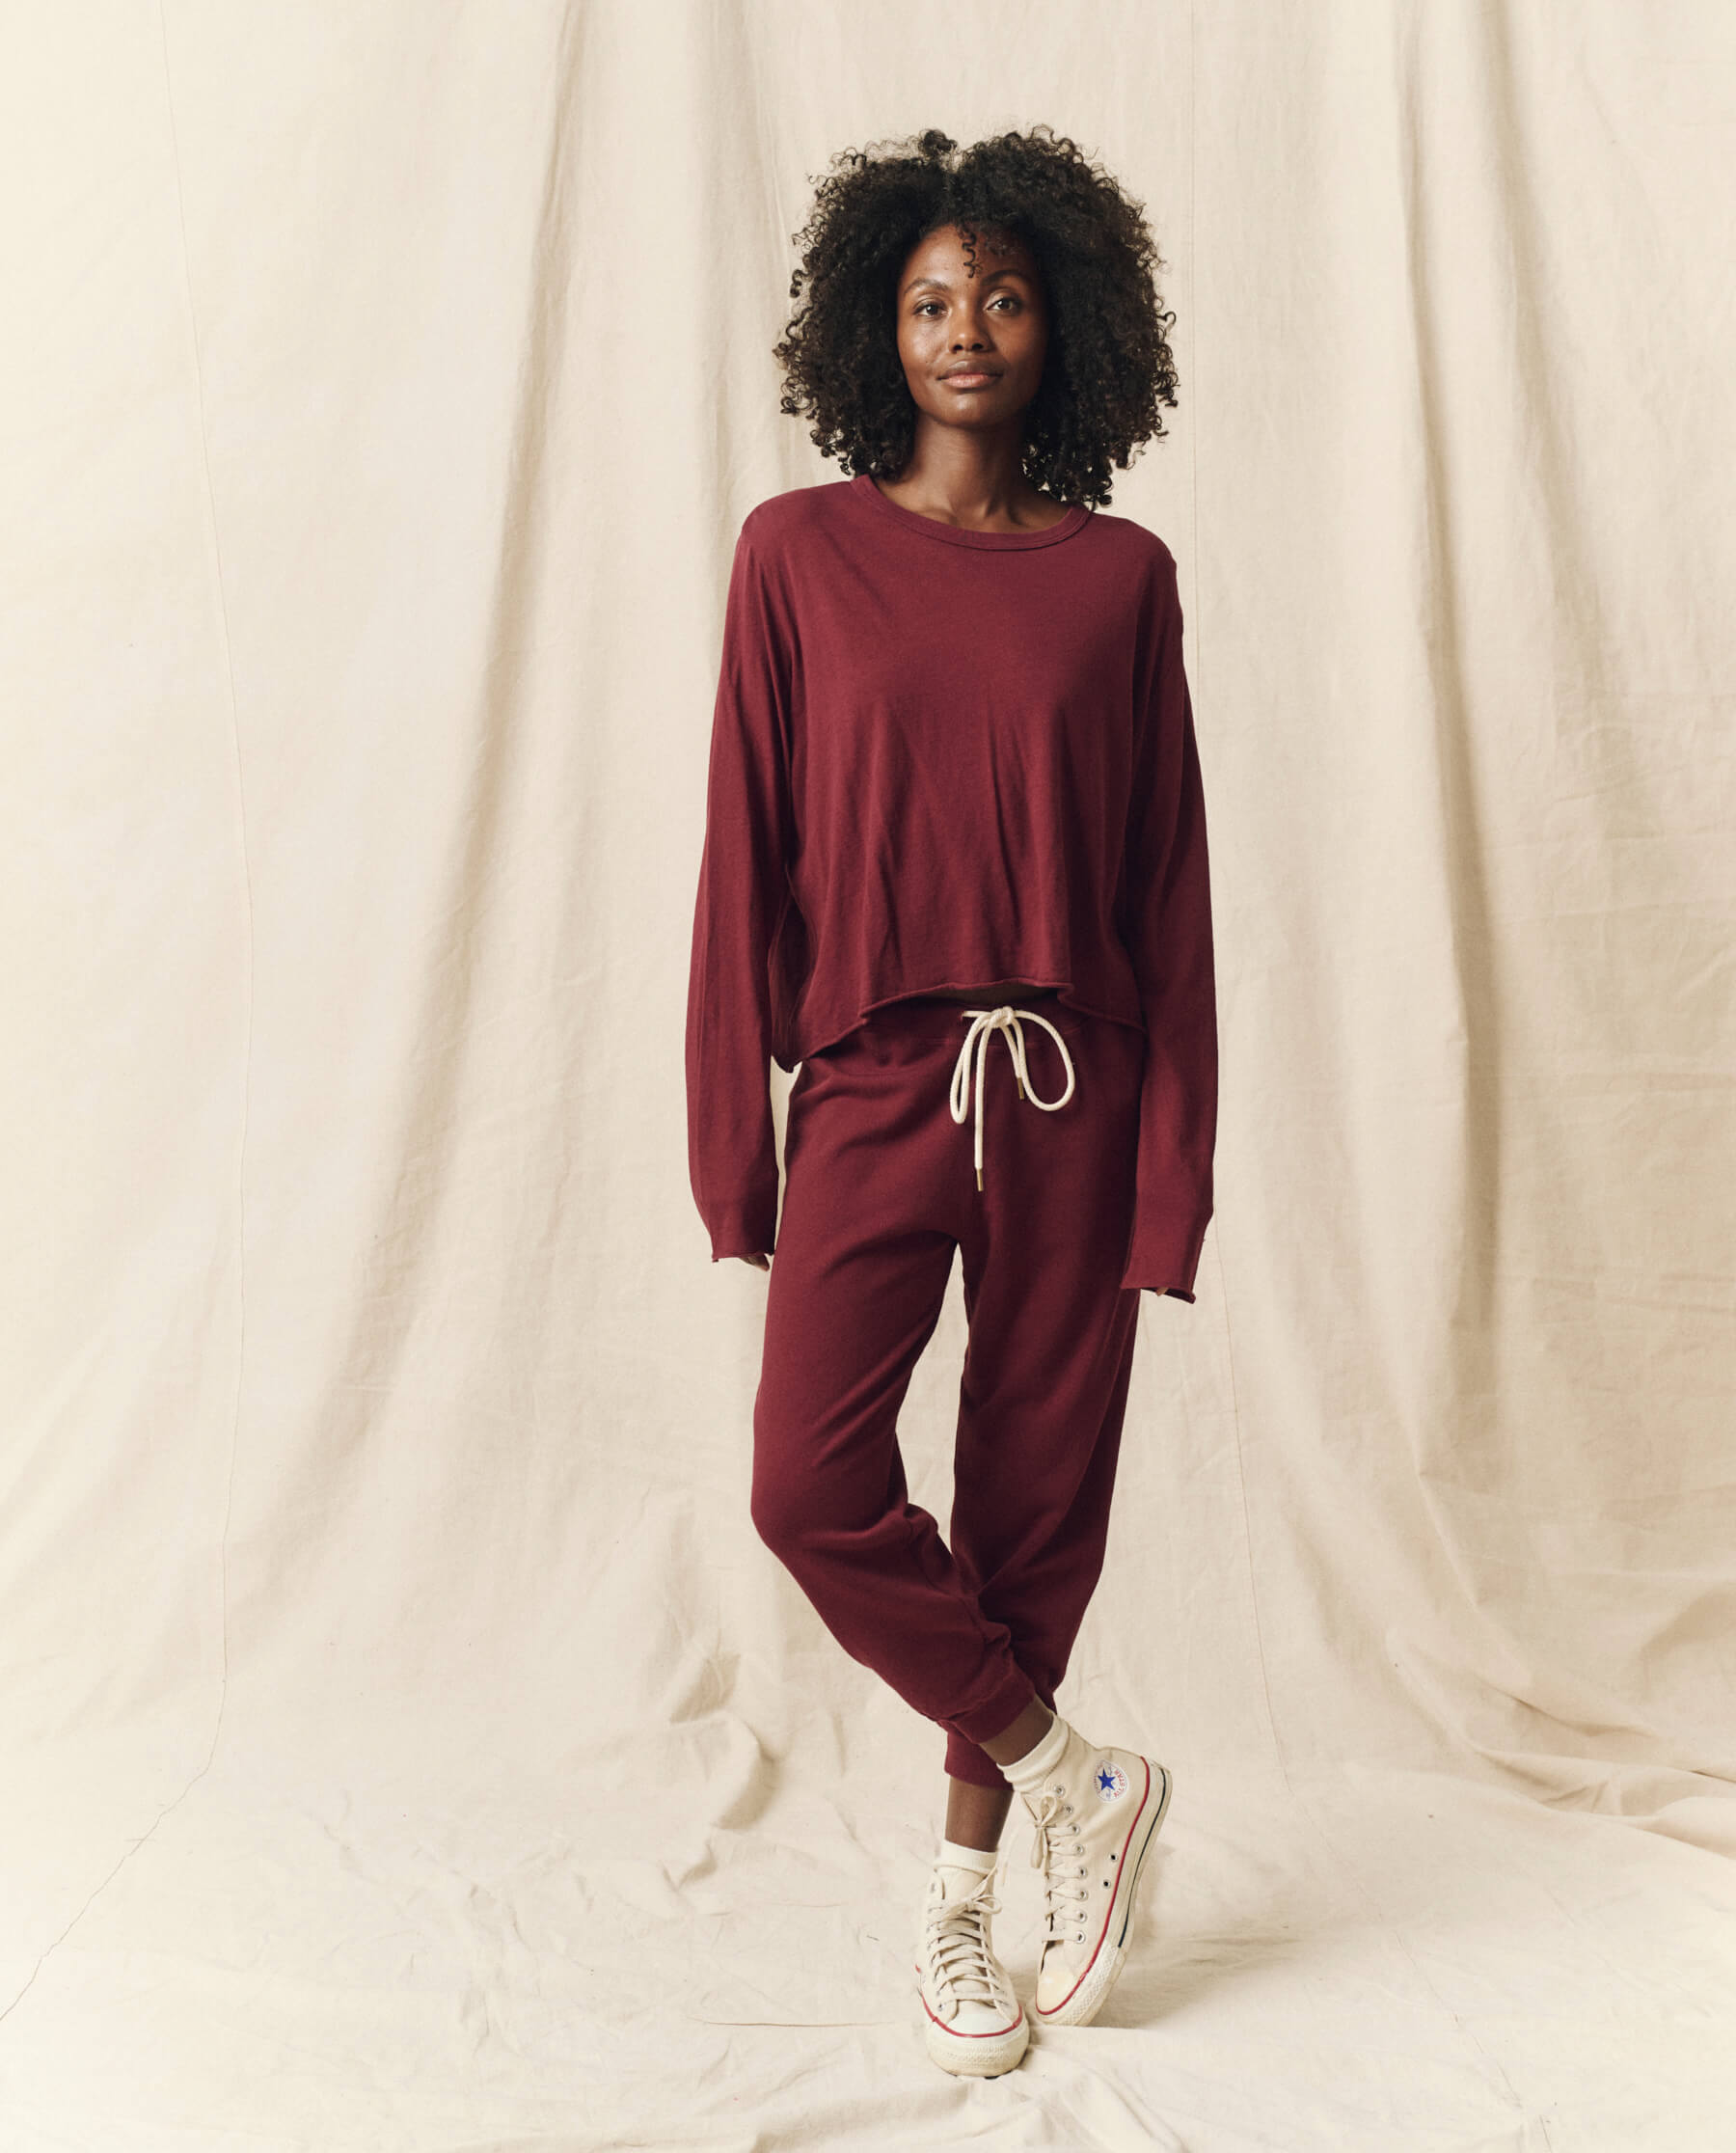 The Long Sleeve Crop Tee. Solid -- Mulled Wine TEES THE GREAT. HOL 23 KNITS